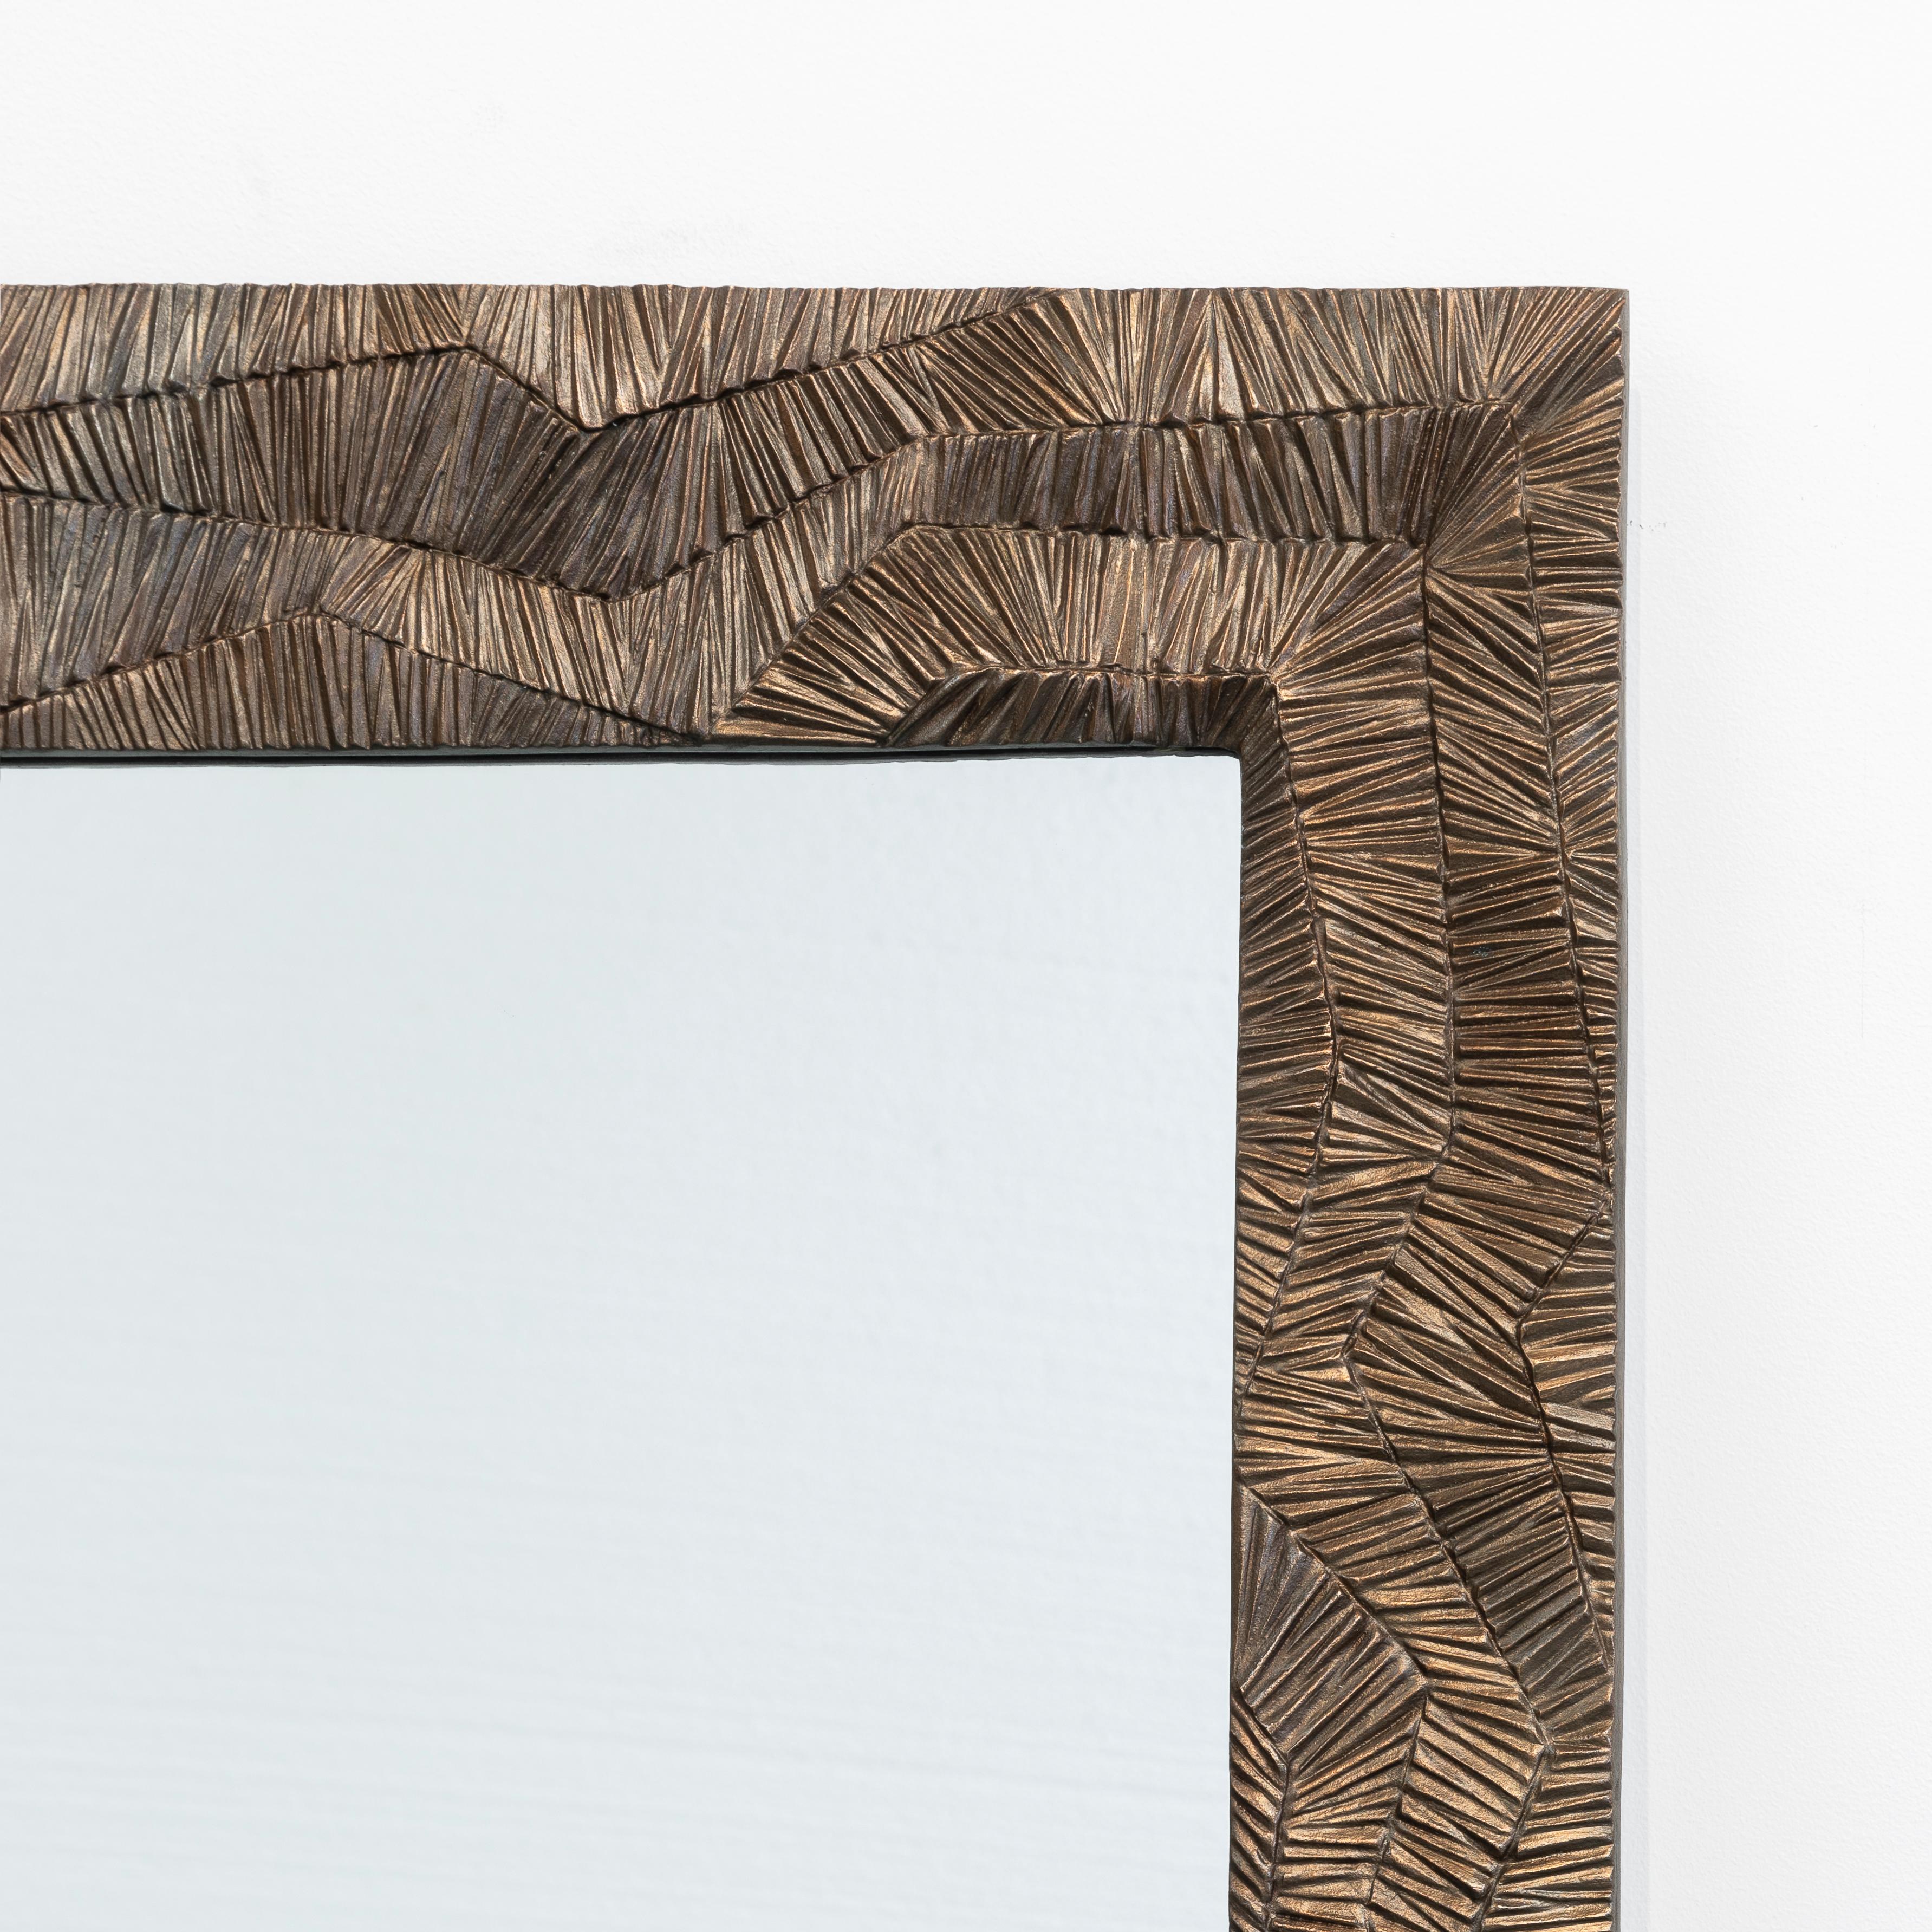 Large mirror in texture bronze 

Anasthasia Millot’s new collection of delicately and rigorously crafted furniture is a feat. In 2014 she brought us her first groundbreaking collection influenced by her studies in fashion design with subtly dynamic